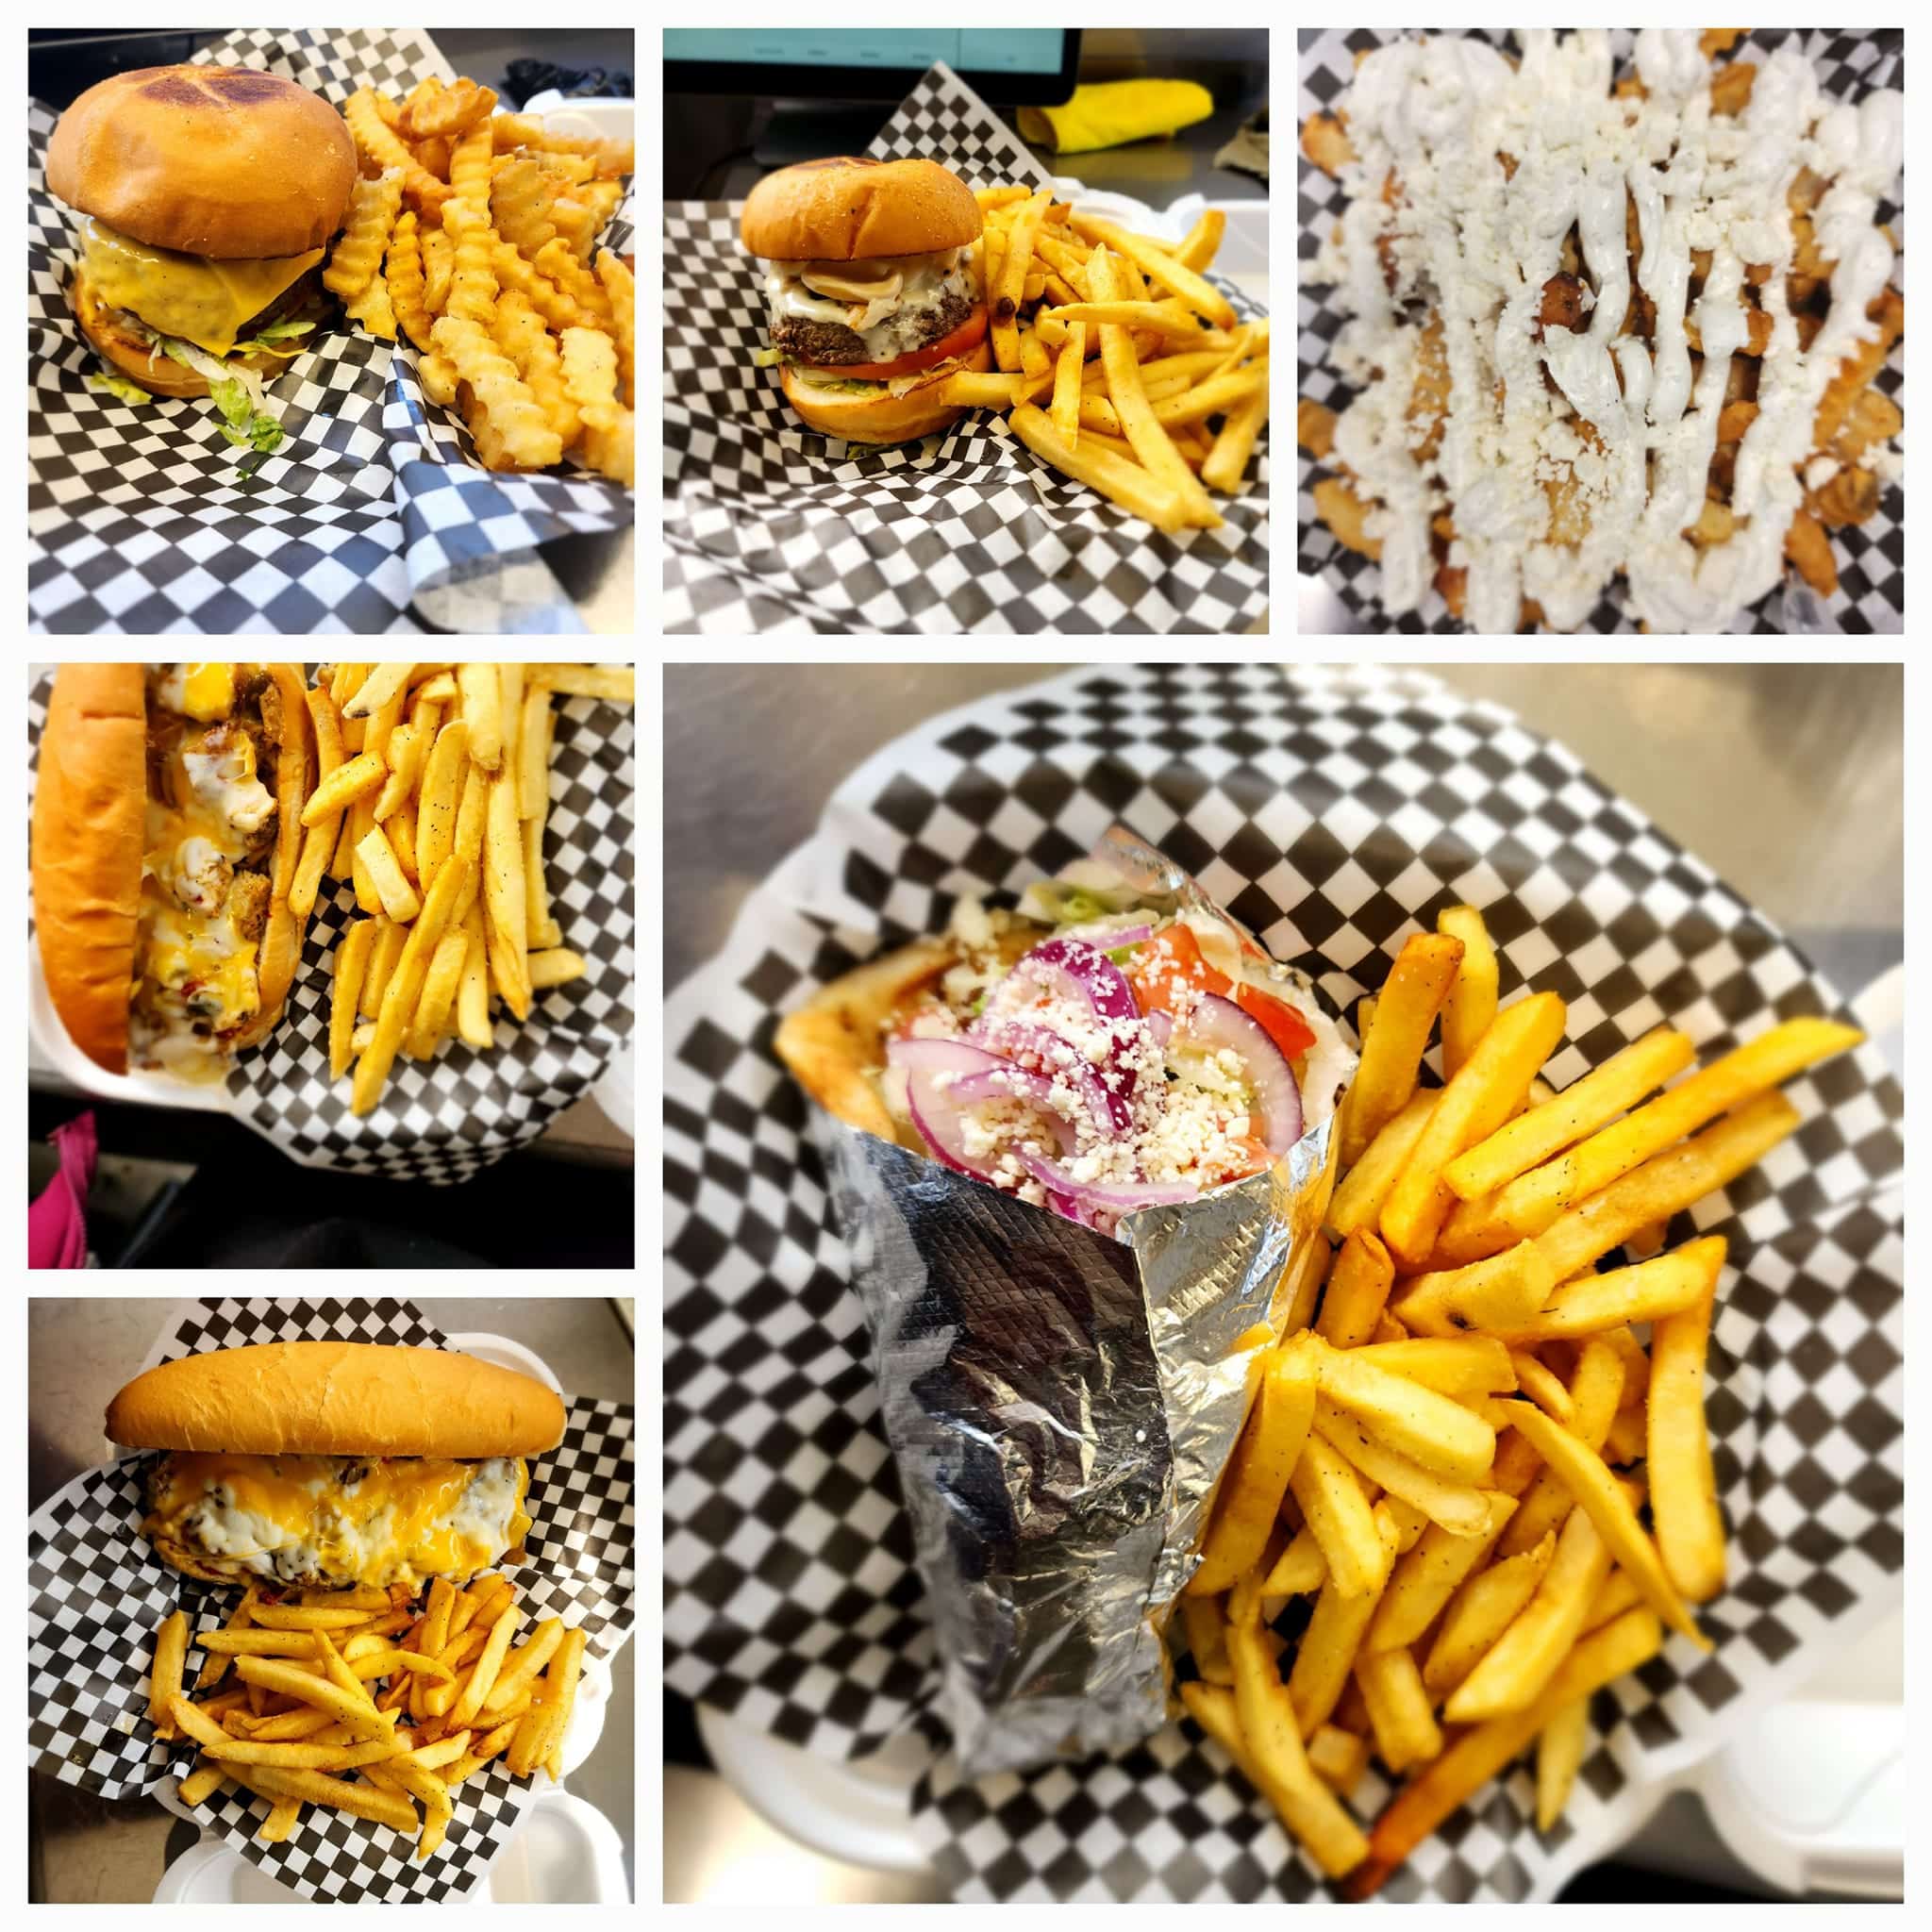 Collage of six images featuring various fast food meals, including burgers with fries, a hot dog, and a gyro, all served in baskets.